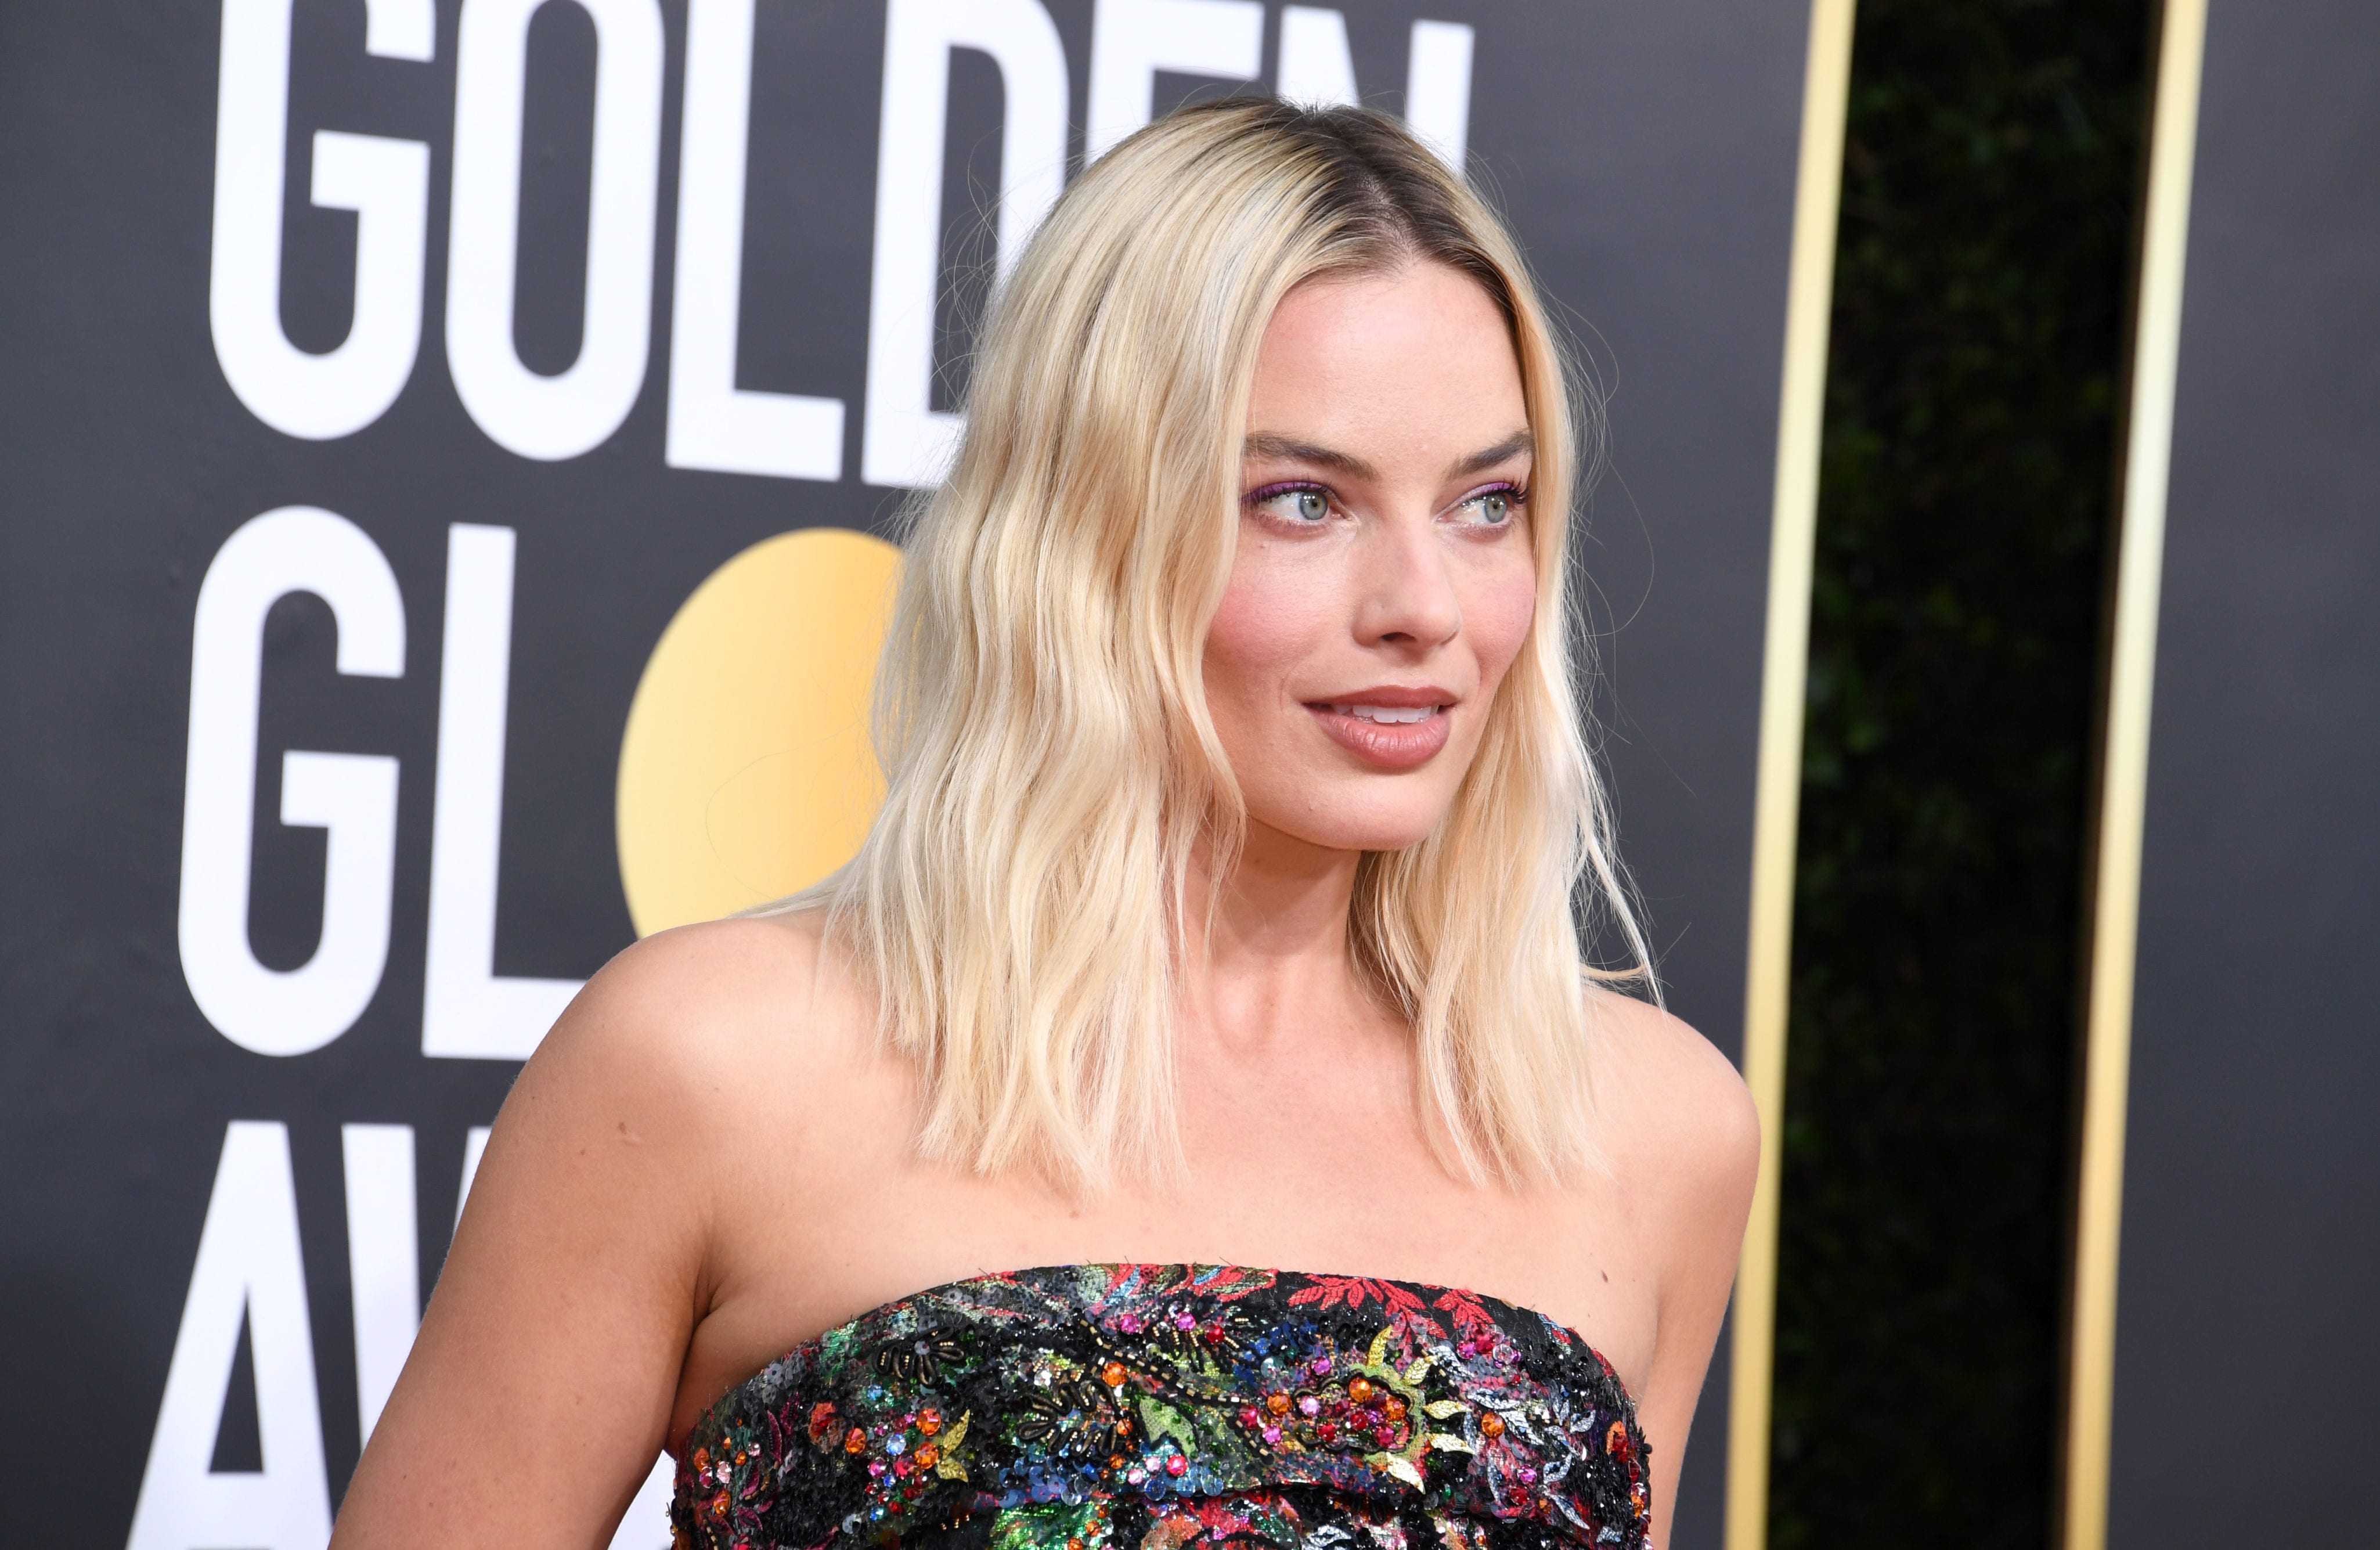 The Best Red Carpet Looks From The 2020 Golden Globes - FASHION Magazine